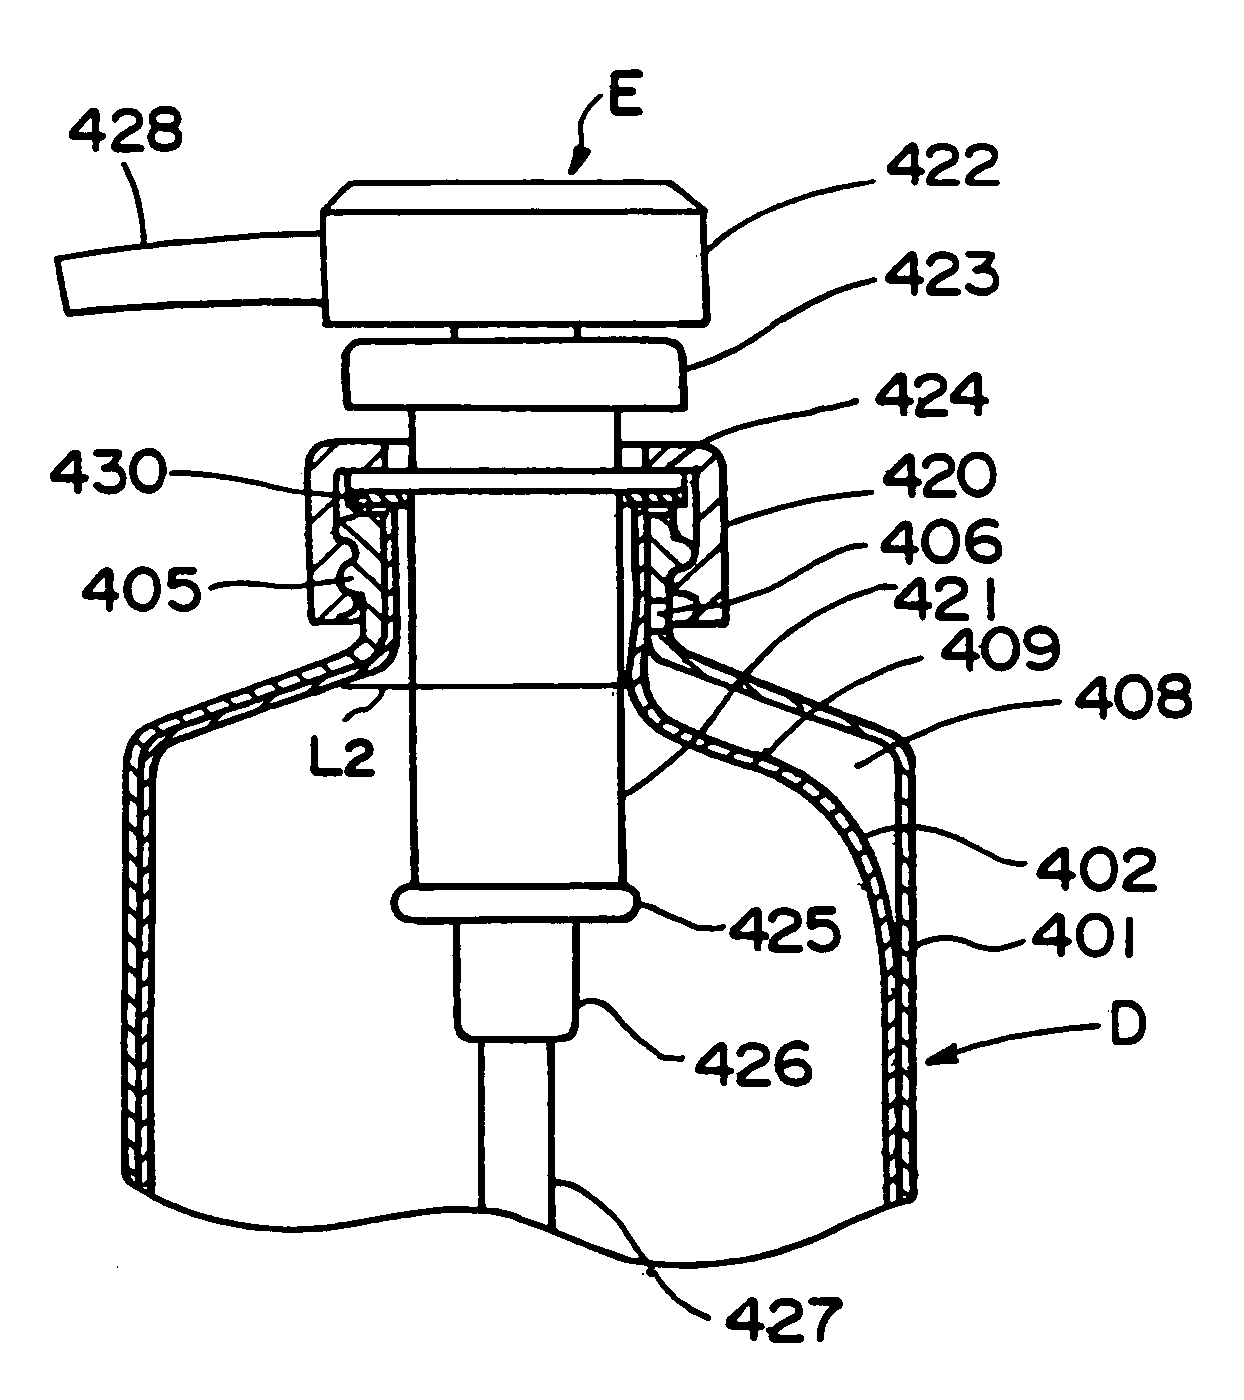 Separable laminated container and associated technology